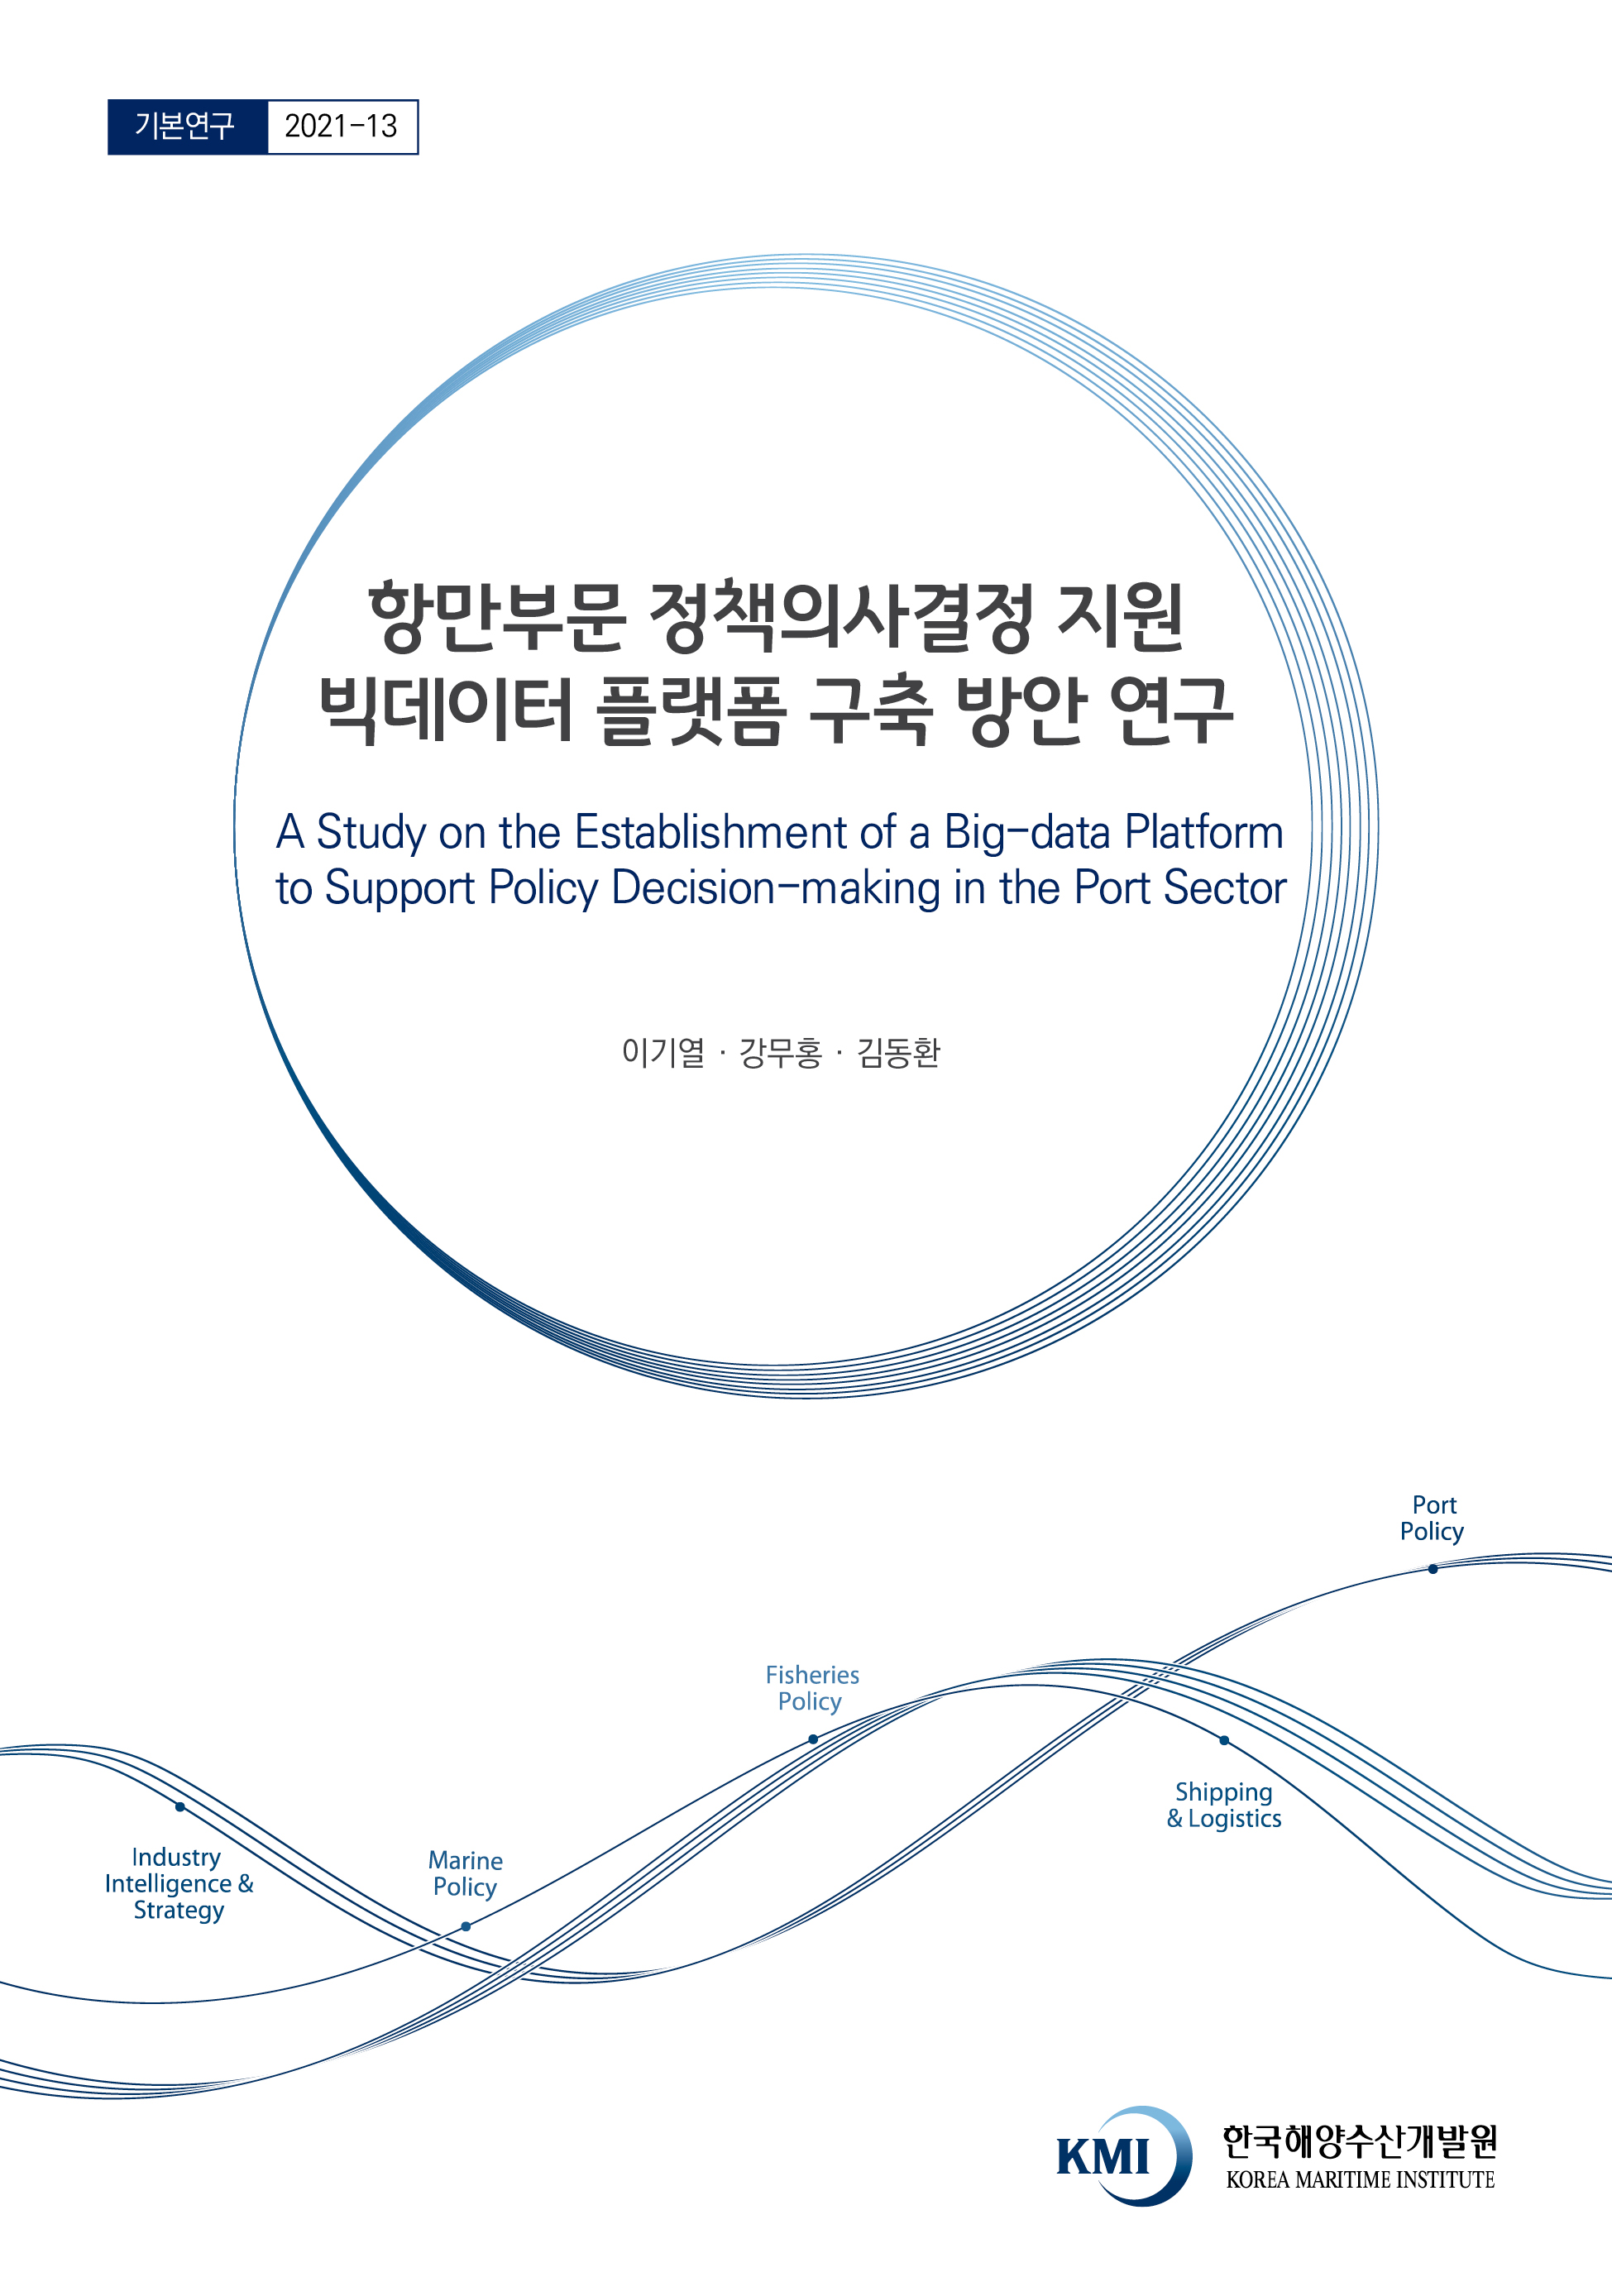 A Study on the Establishment of a Big-data Platform to Support Policy Decision-making in the Port Sector